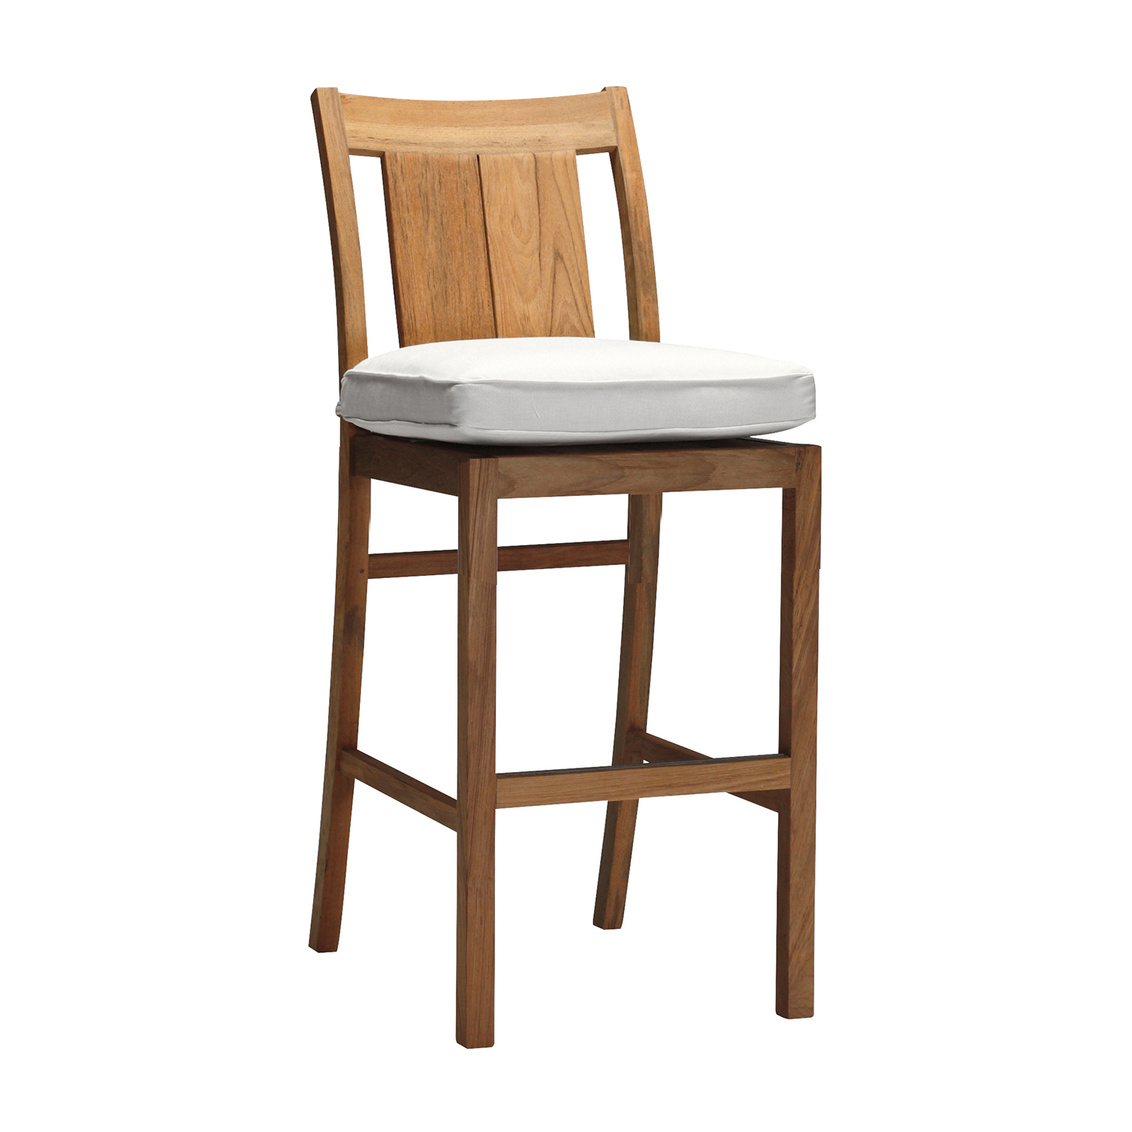 croquet teak counter stool in natural teak – frame only product image